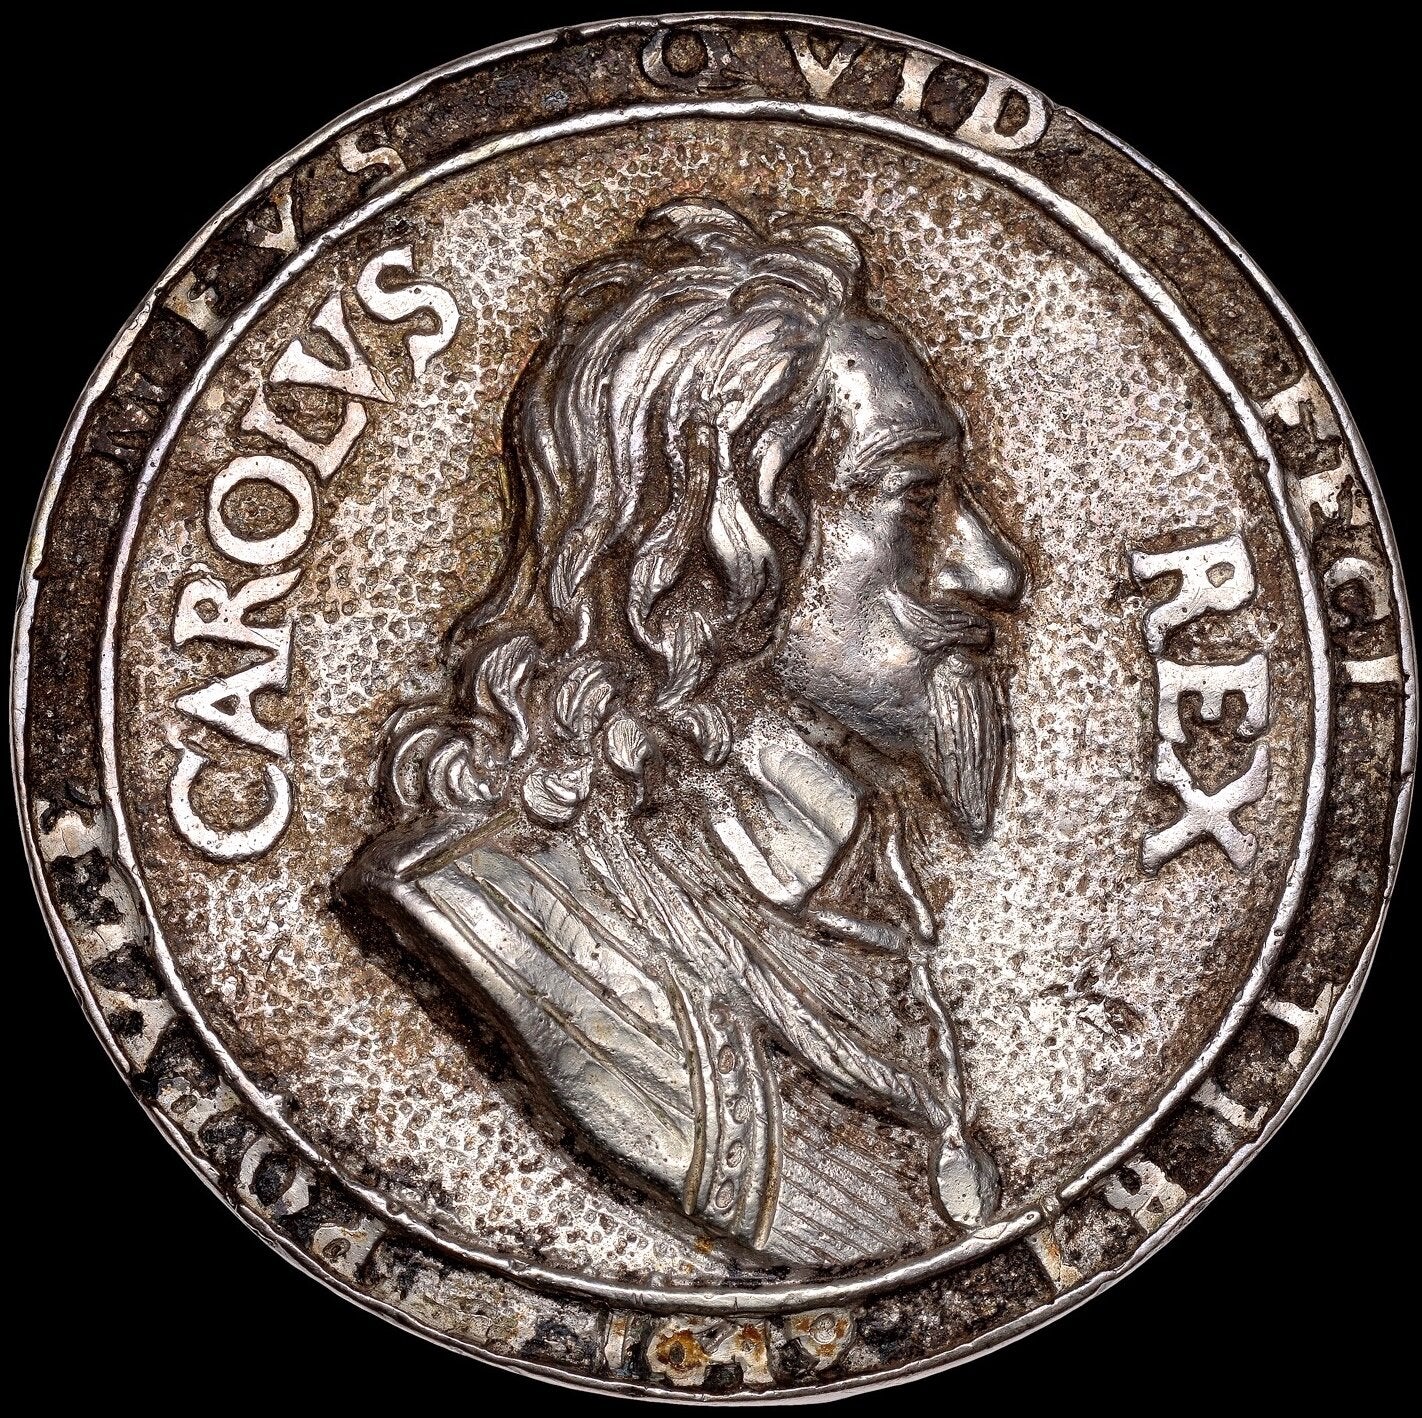 1649 Charles I death and memorial 57mm silver medal MI 349/208 E161 GVF